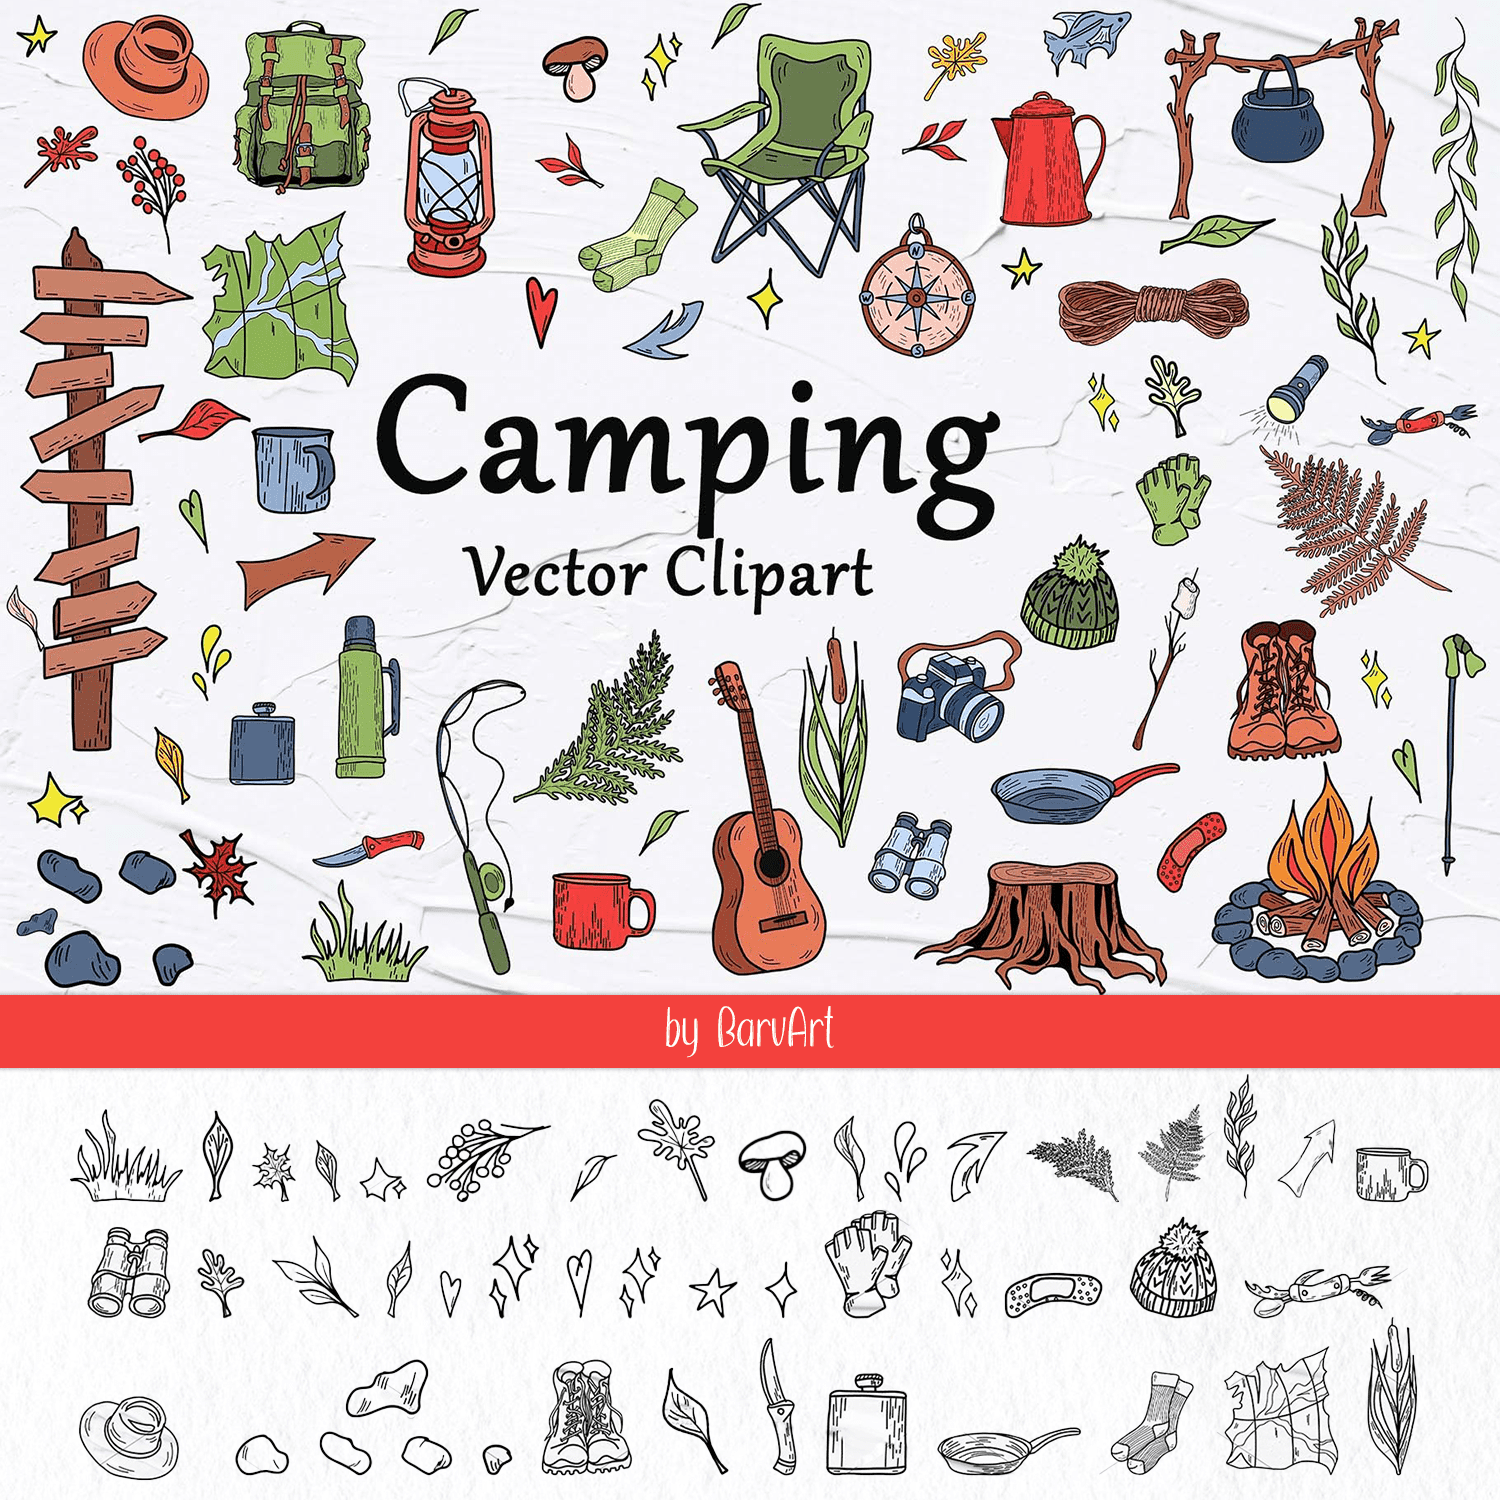 Camping Vector Clipart.